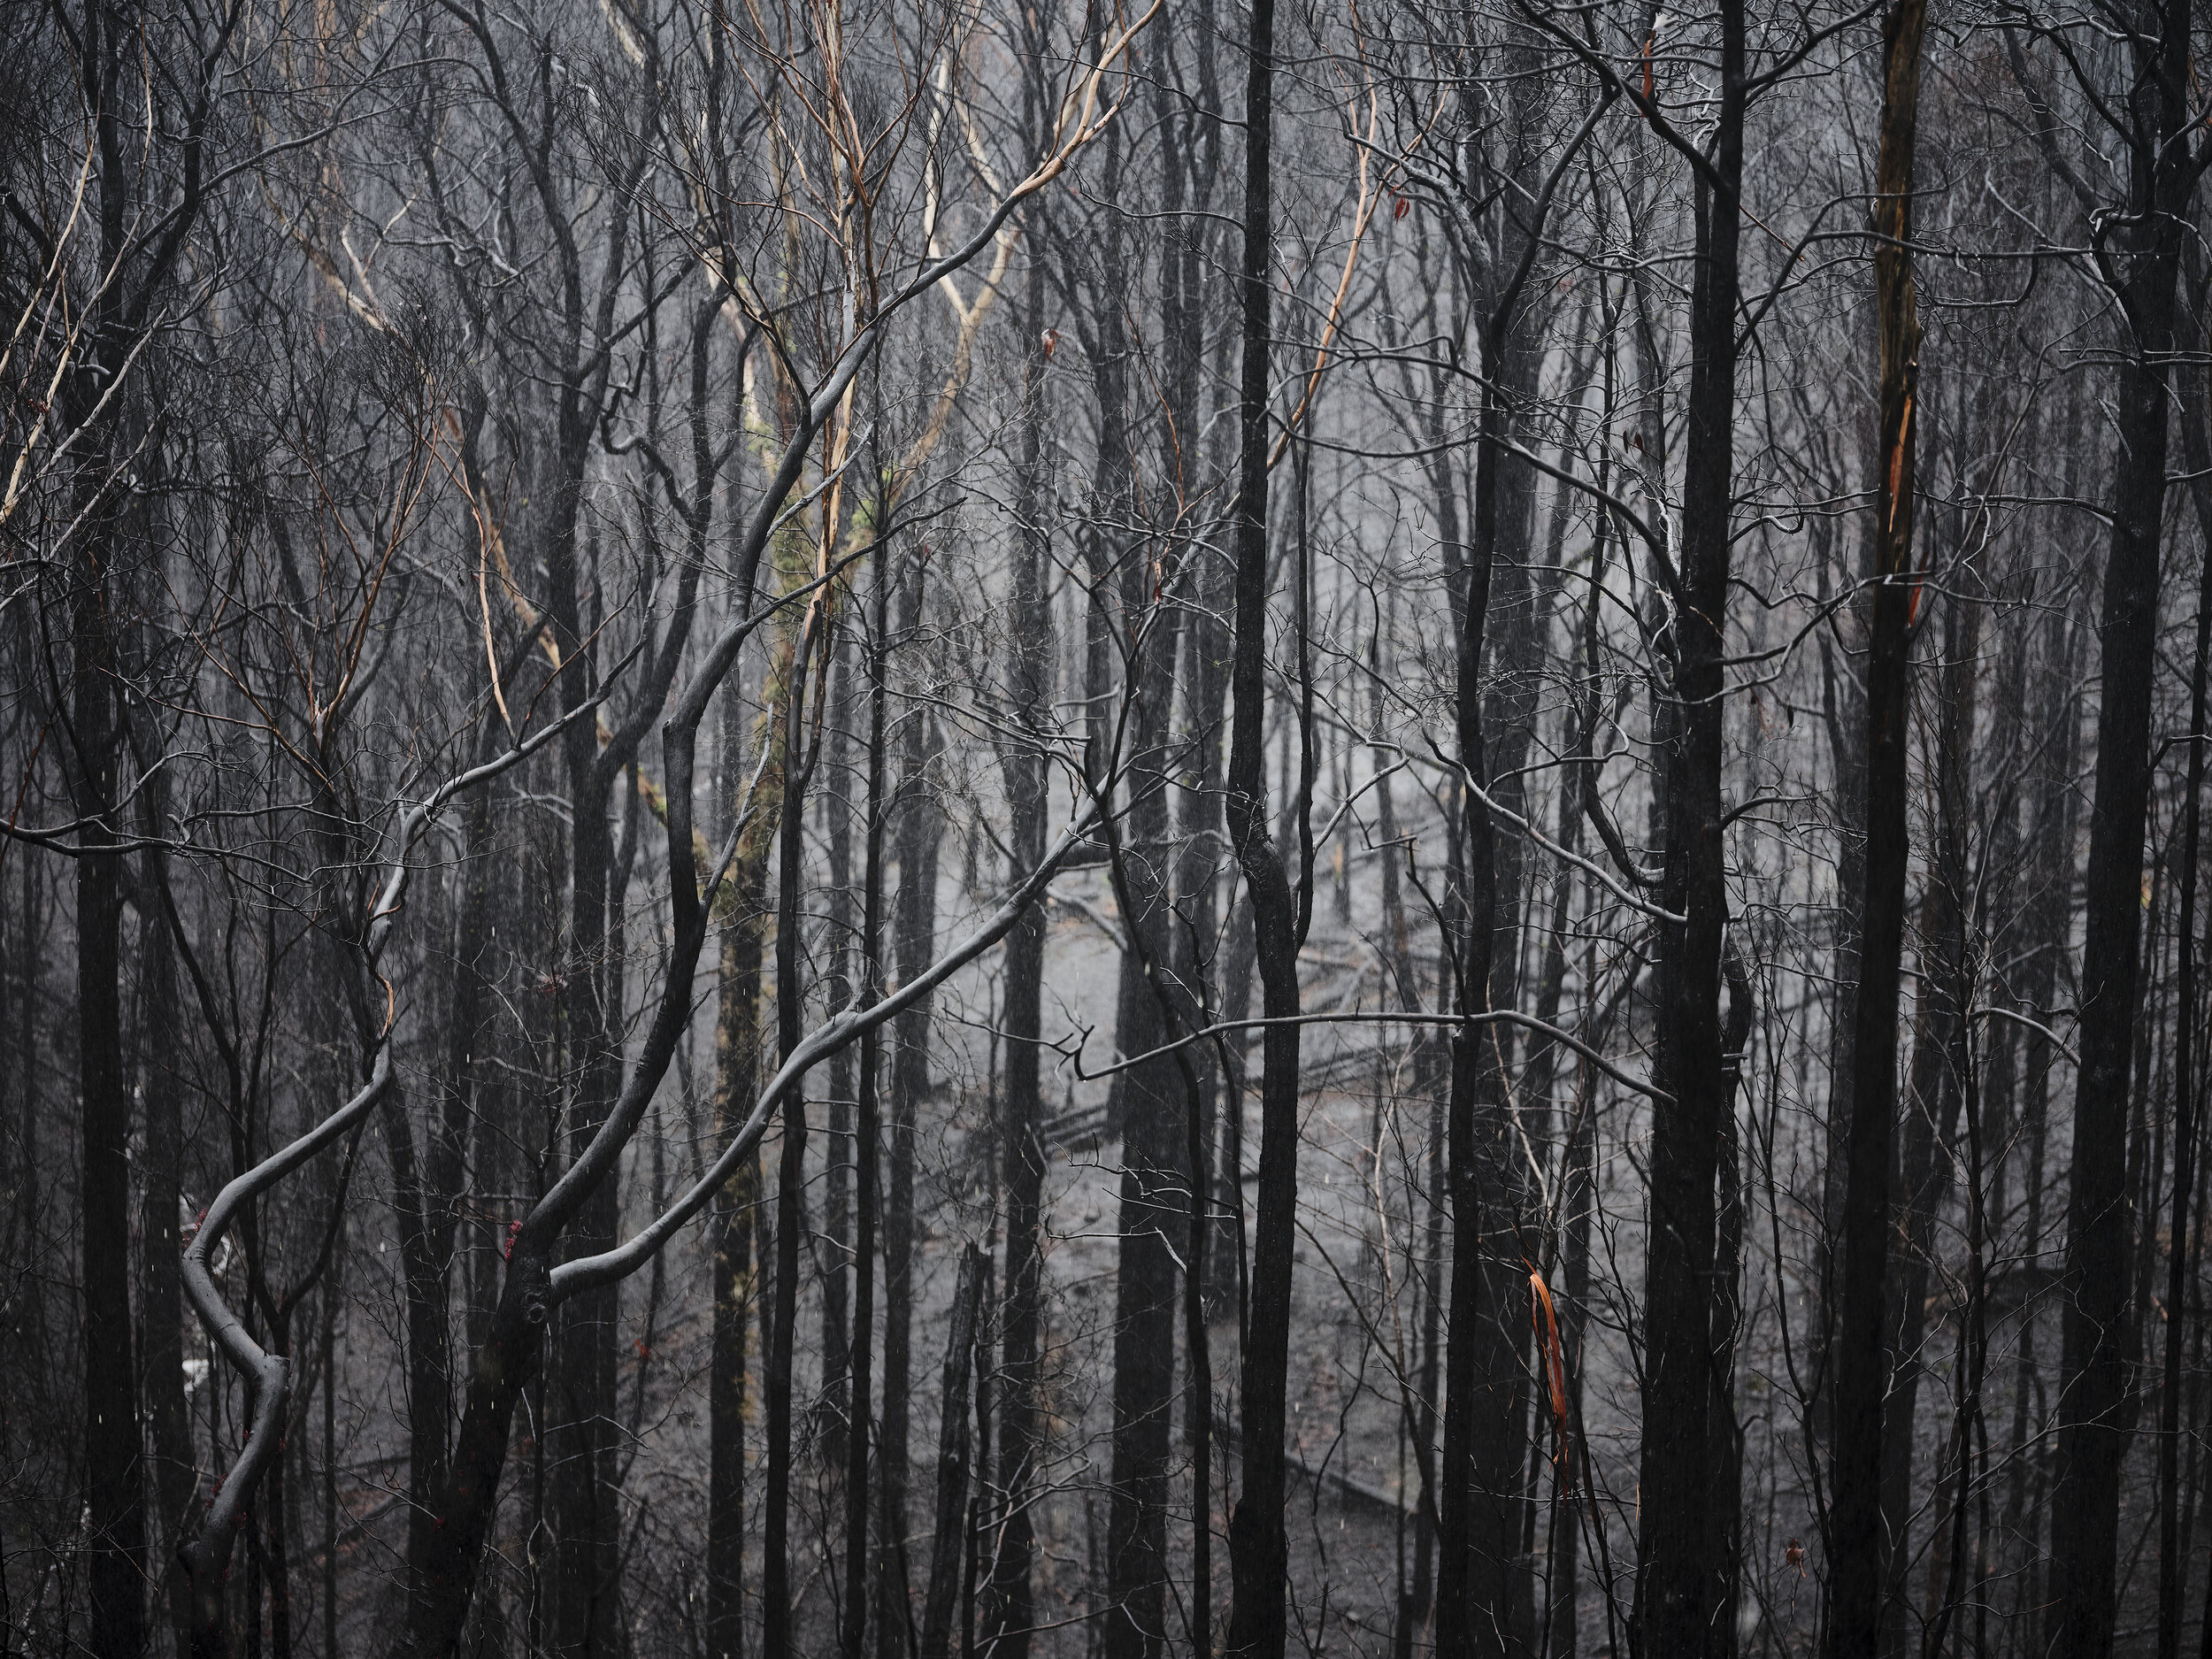 After the fires III